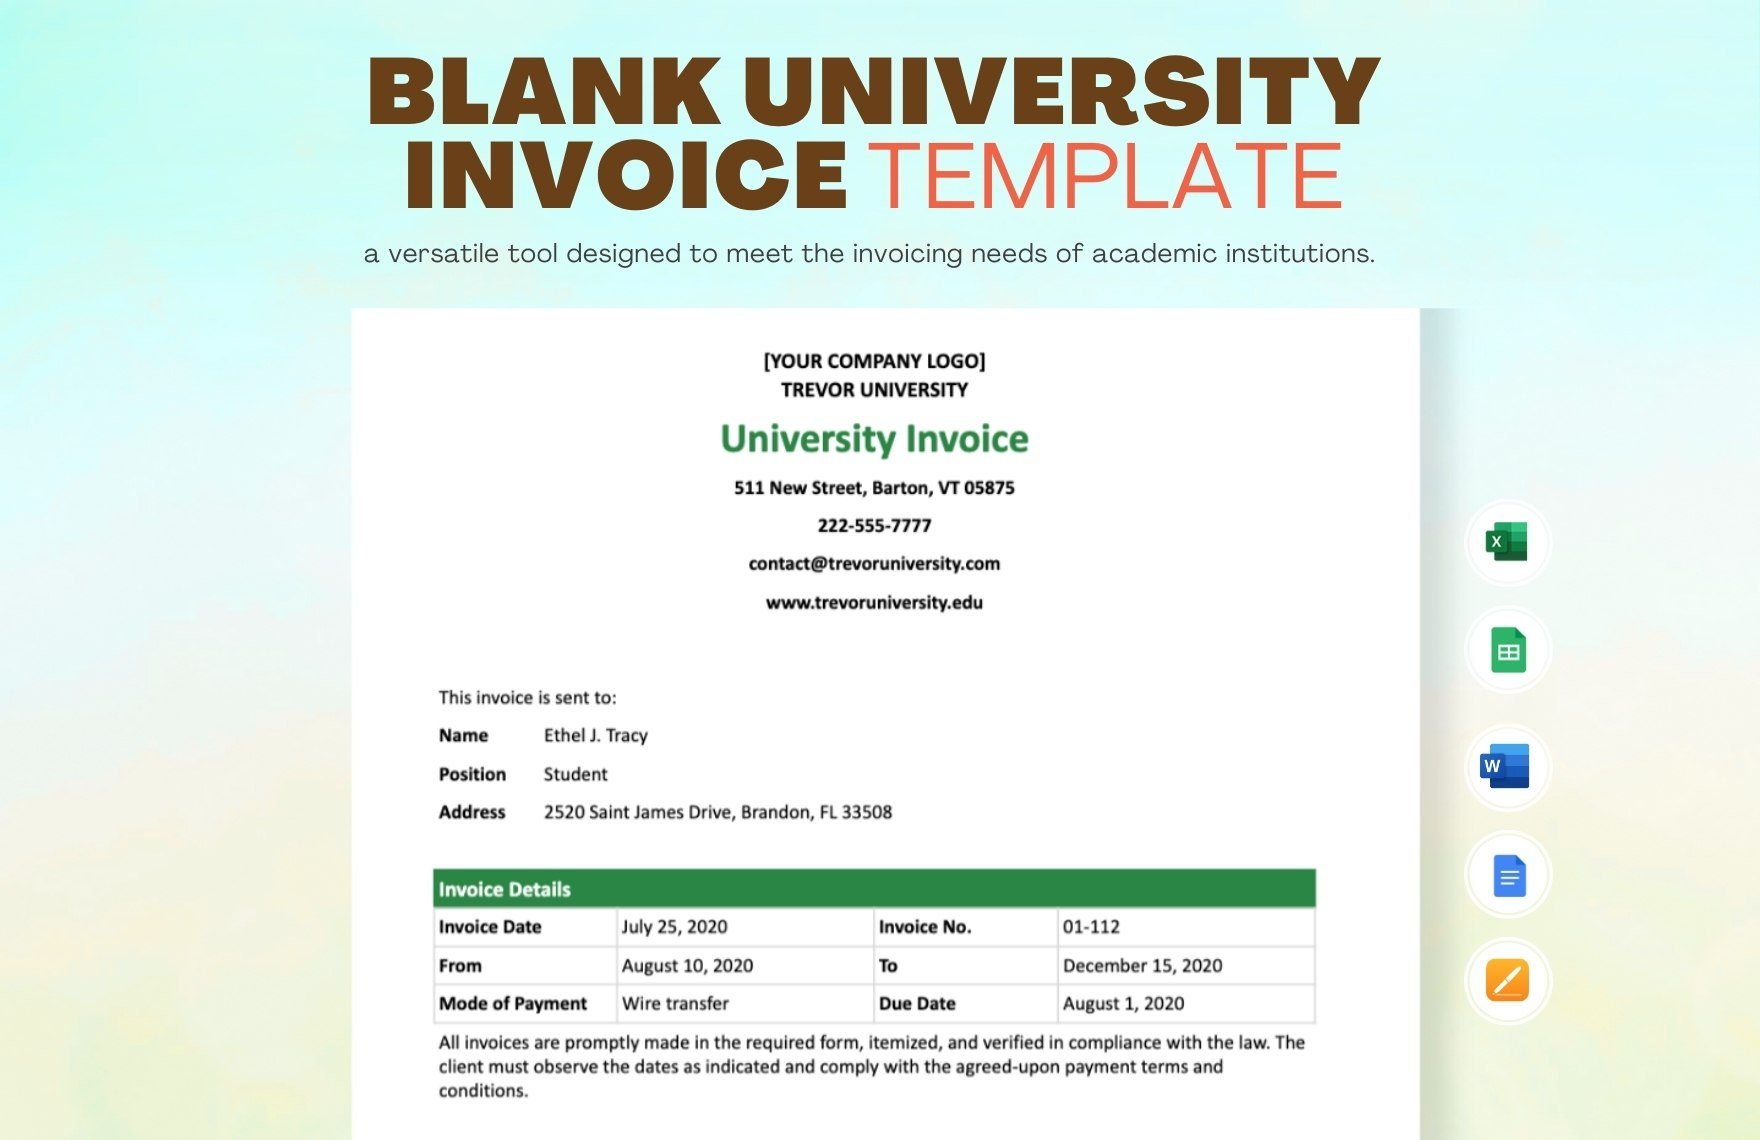 Free Blank University Invoice Template in Word, Google Docs, Excel, Google Sheets, Apple Pages